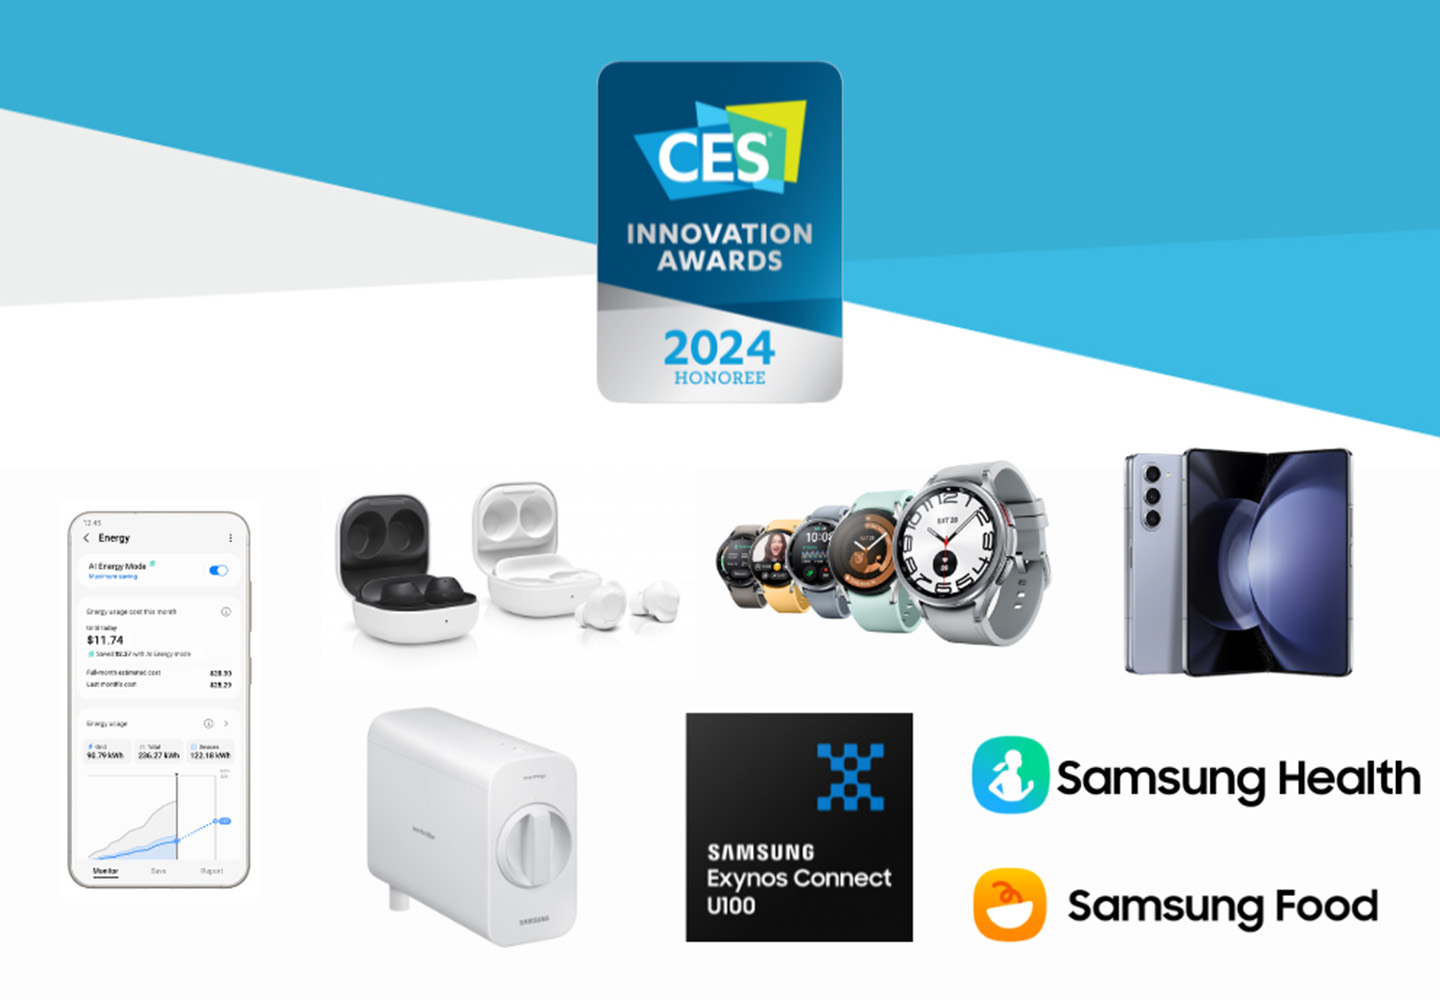 Image to illustrate Samsung recognized for reinventing the future by Consumer Technology Association